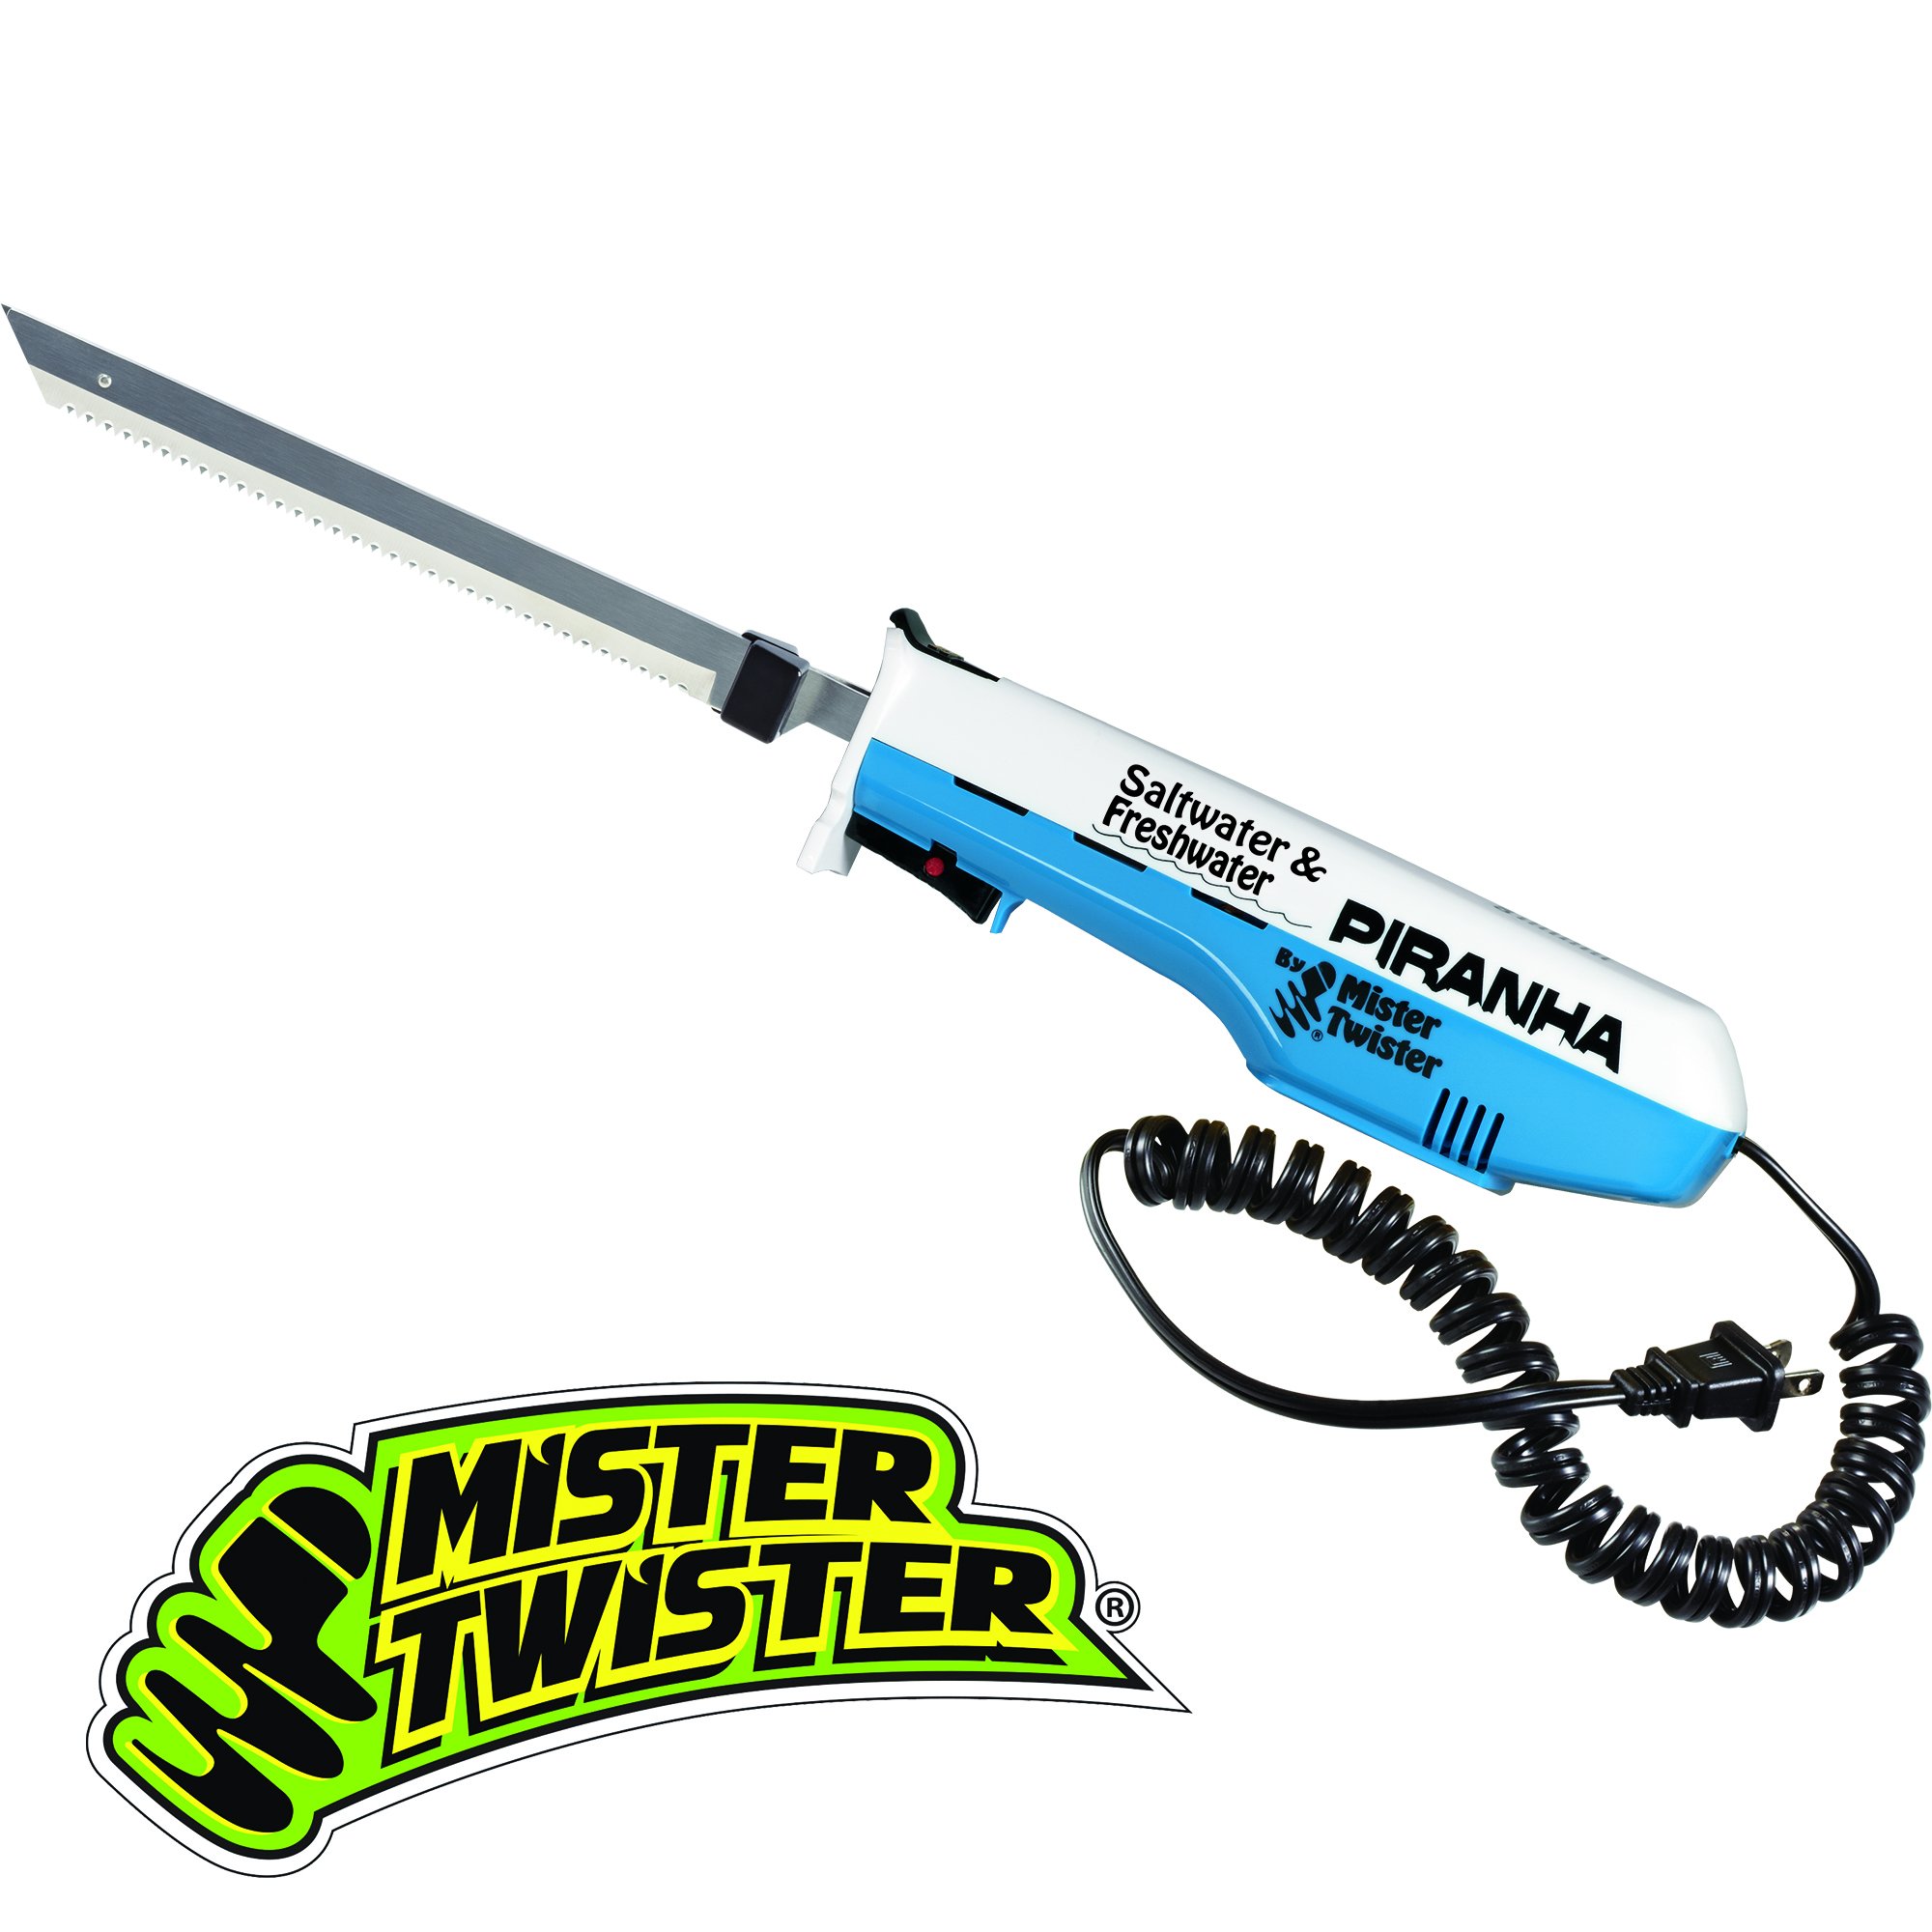 Mister Twister on X: Need a Black Friday deal for a new fillet knife to  make cleaning fish a breeze? If so, you'll be glad to hear that on Black  Friday at